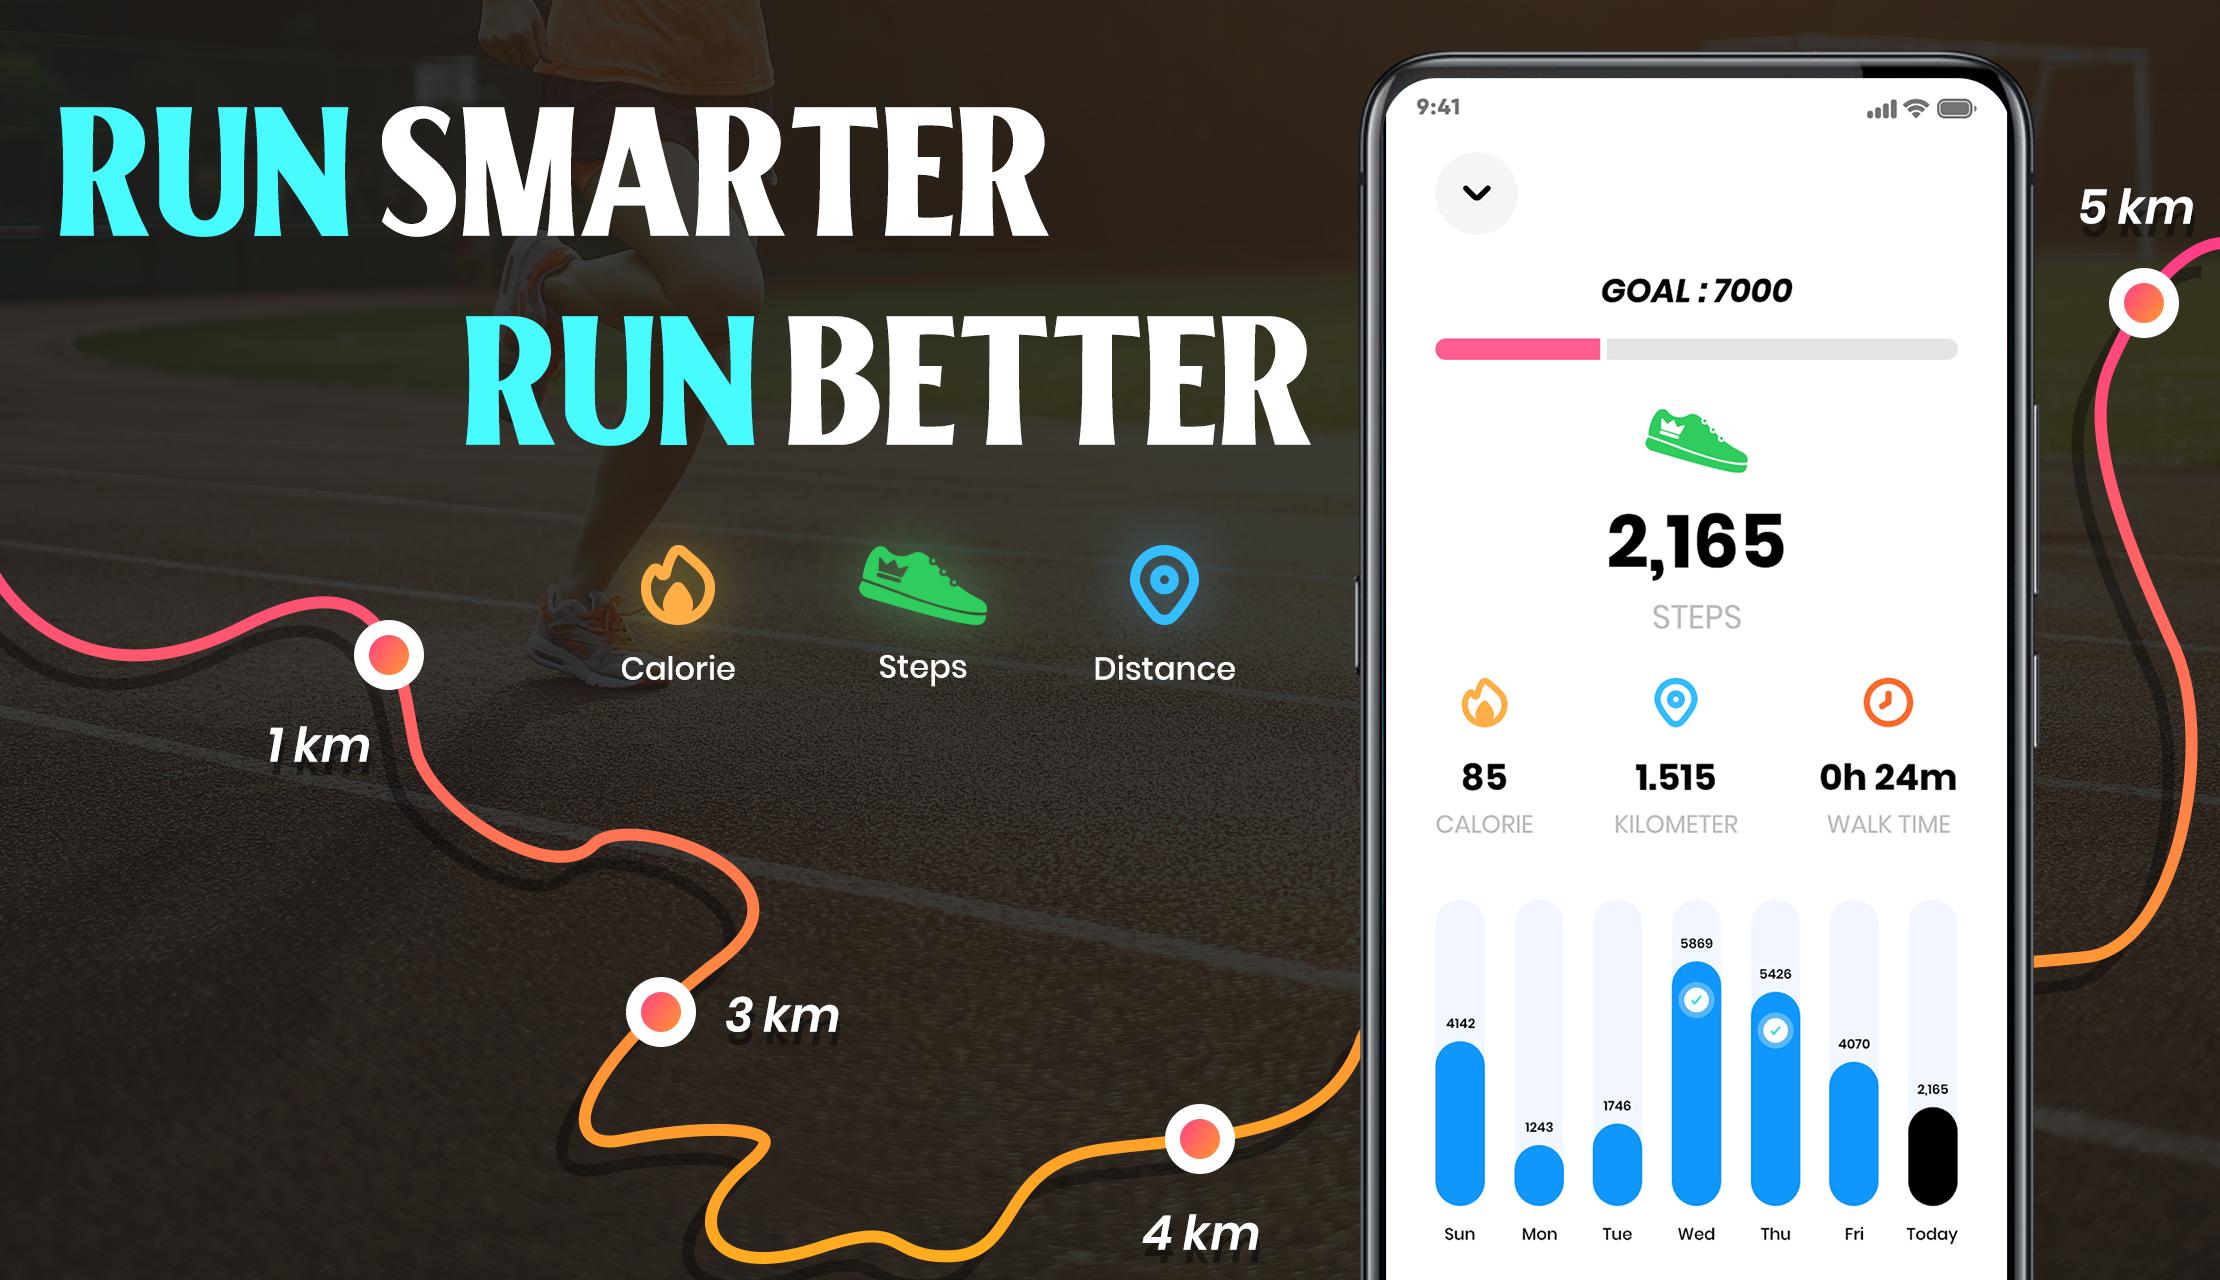 Step android. Pedometer Counter na Android. Pedometer Step distance Tracker Counter na Android. Quickstep Android. Walk Run distance Tracker Counter na Android.